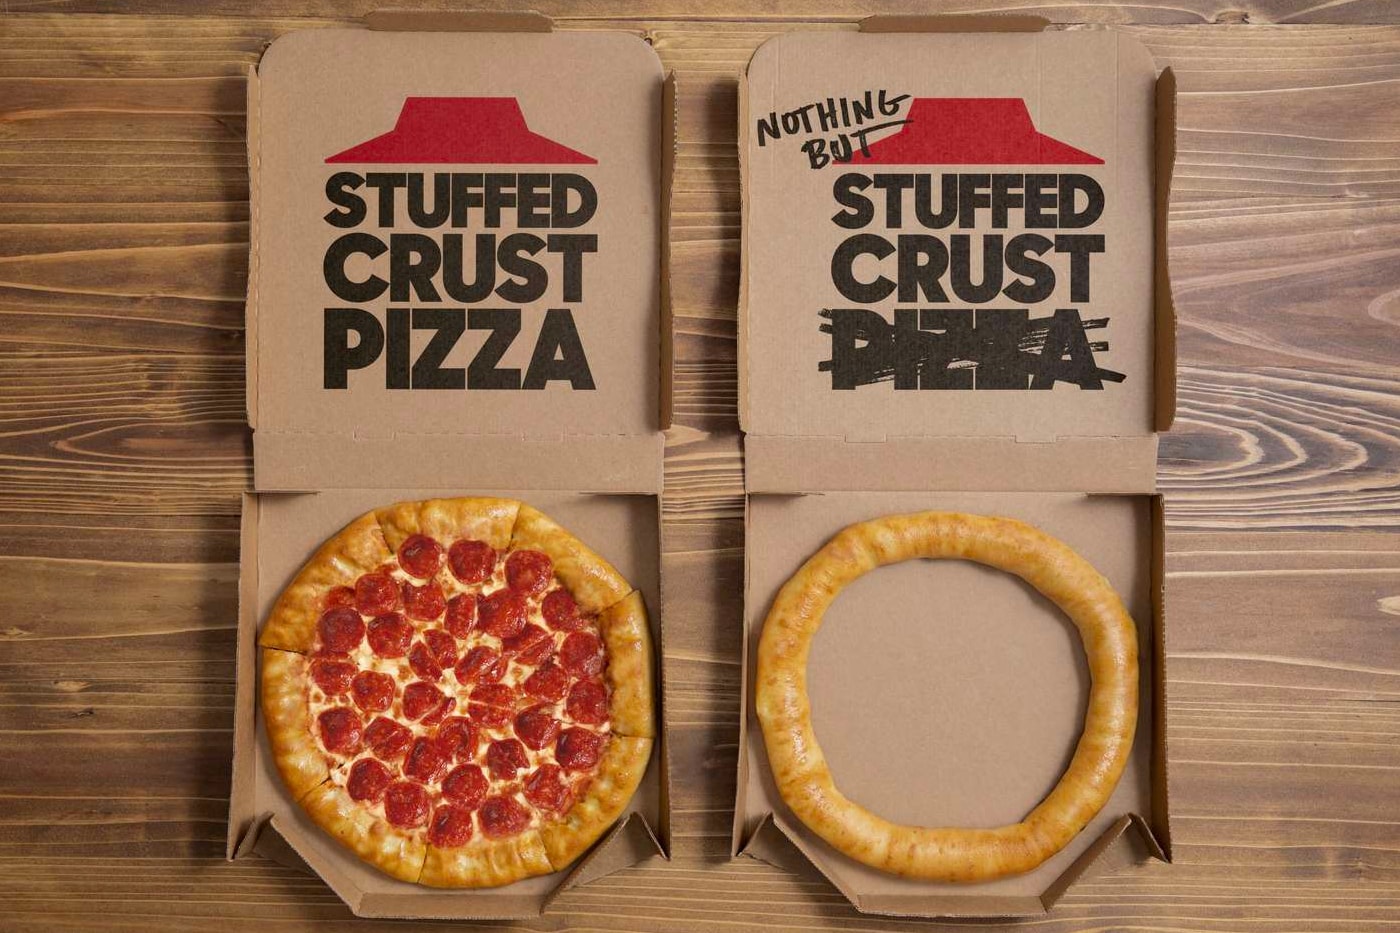 Pizza Hut Is Celebrating the Stuffed Crust's 25th Anniversary With Nothing but Stuffed Crust Pizza Dallas Fort Worth Los Angeles